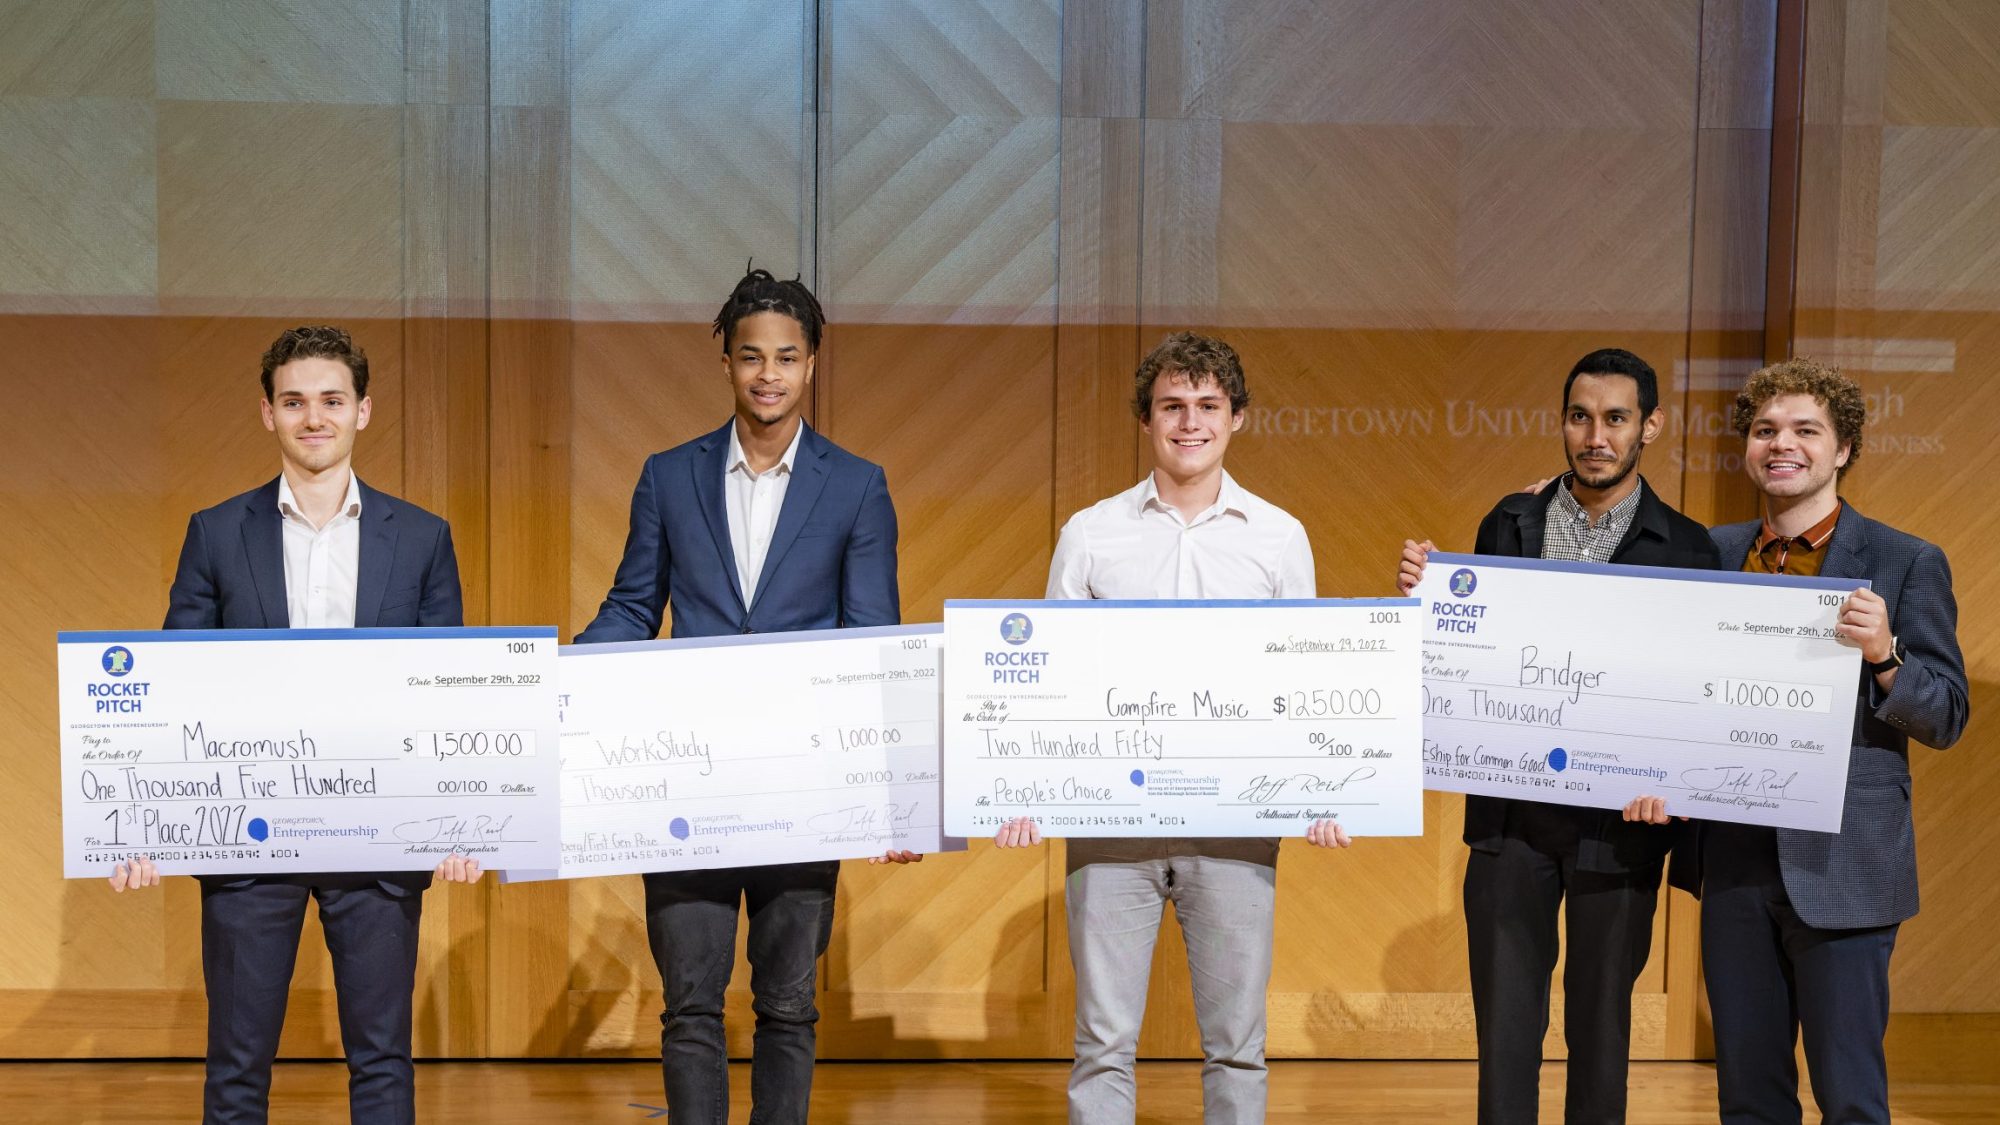 Student winners in pitch competition, holding large checks.